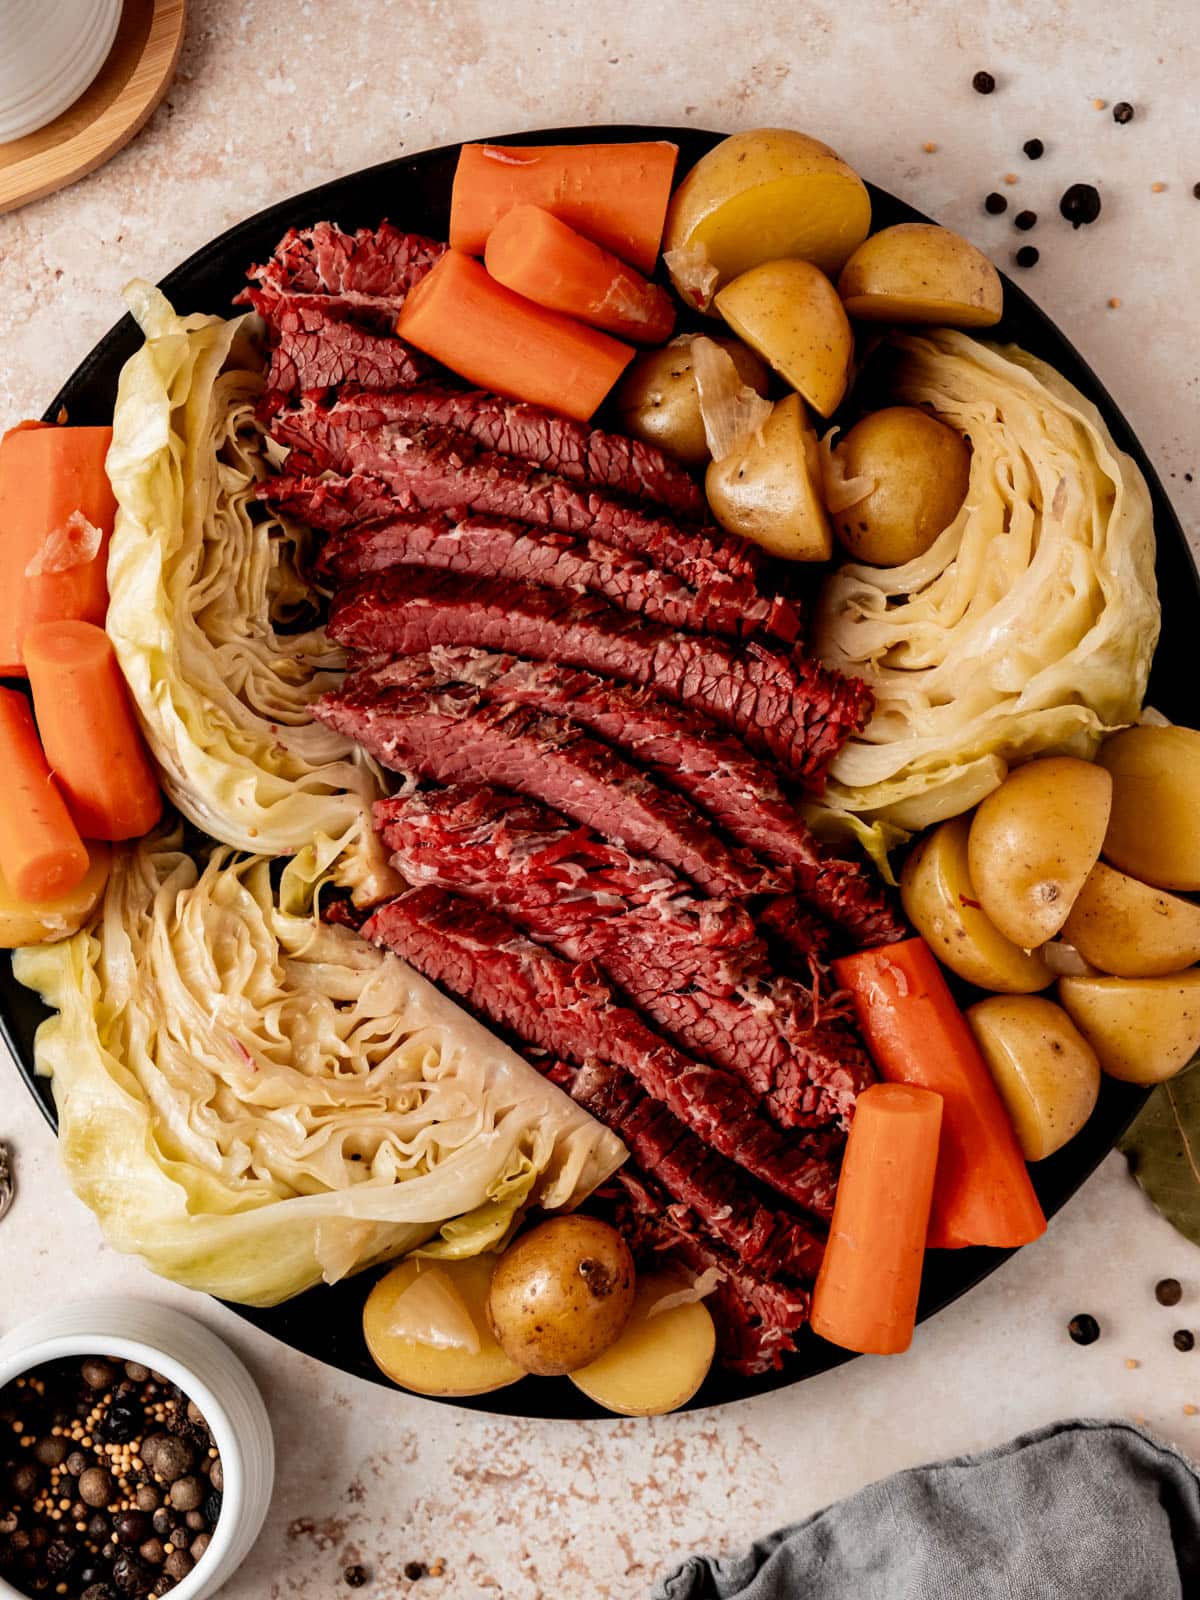 Platter with sliced corned beef, cabbage wedges, potatoes and carrots.